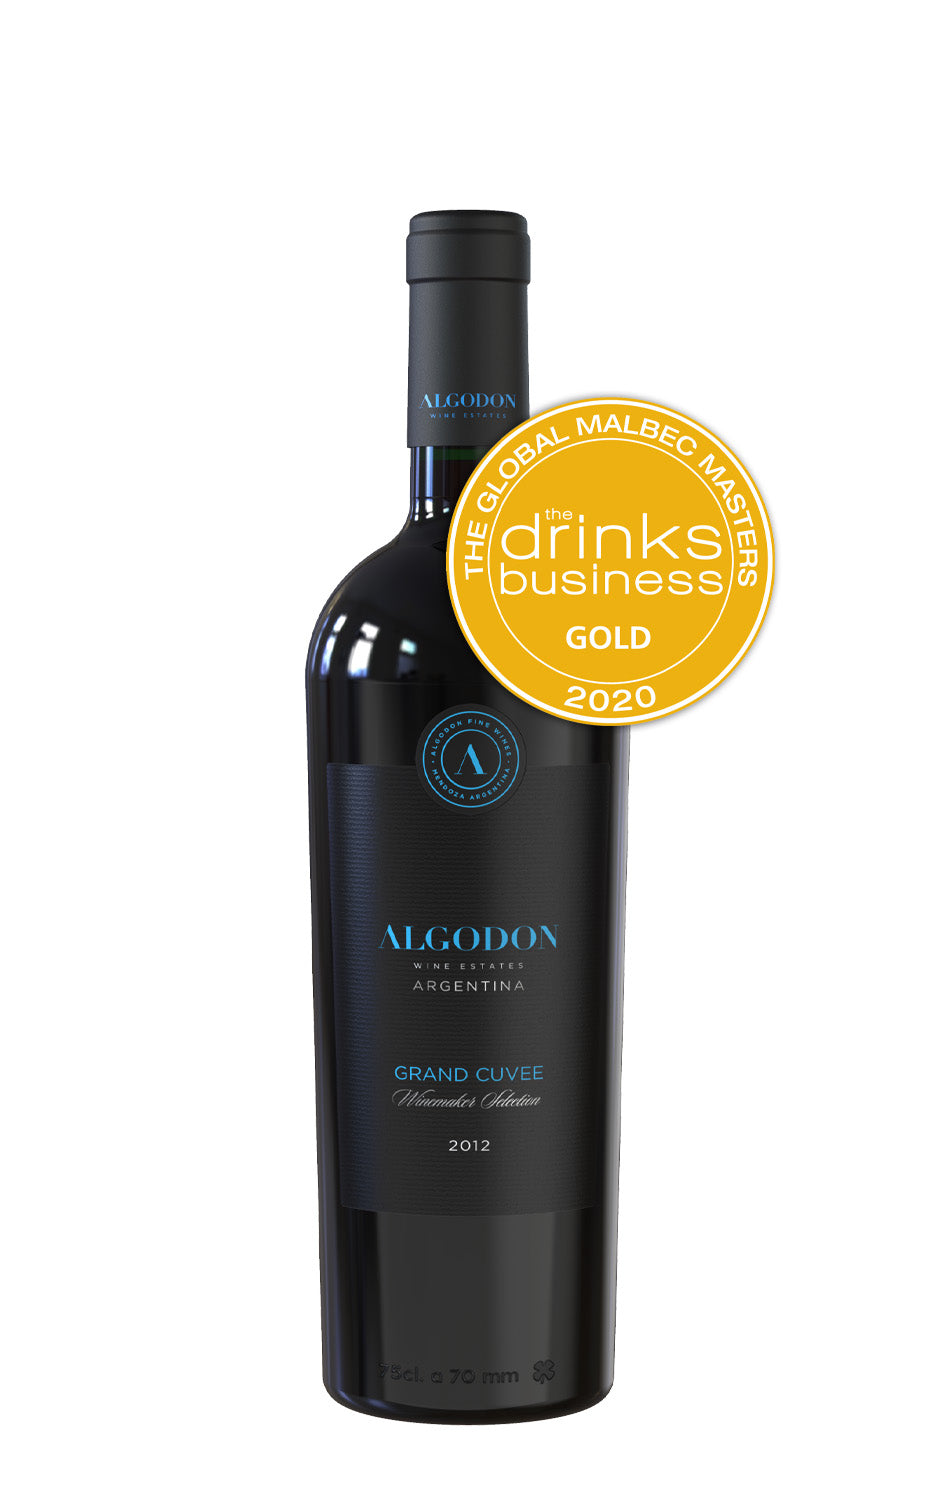 2012 Grand Cuvee - Gold Medal (Oaked Malbec Blend) - 2020 Drinks Business Global Malbec Masters